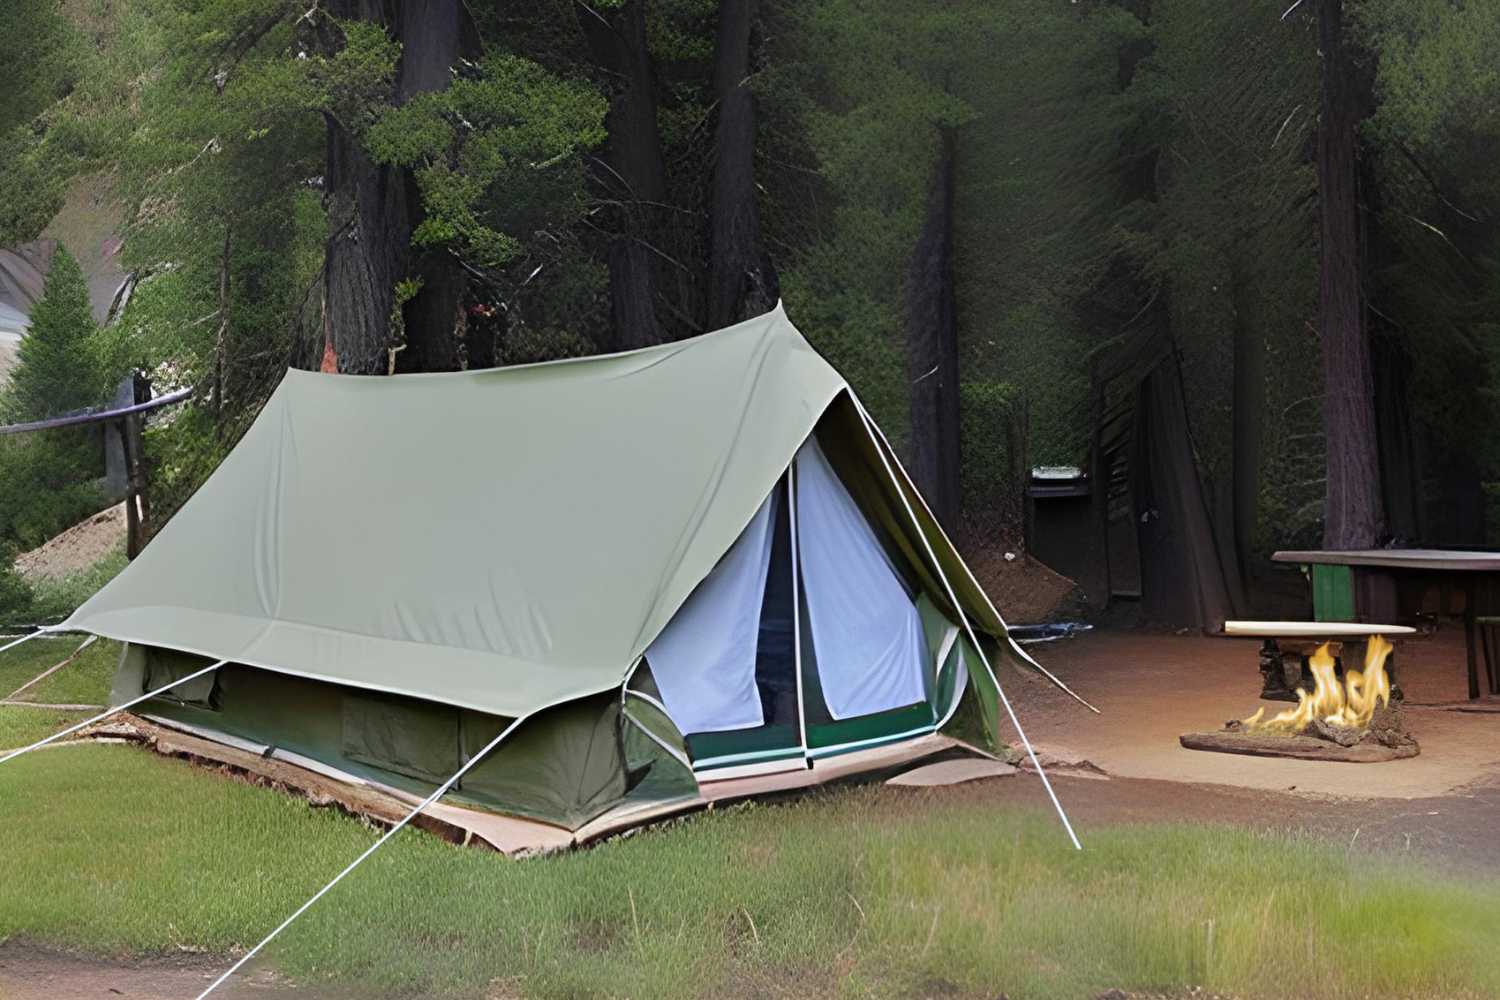 Outfitter & Hunting Tents With a Stove Jack - Life inTents